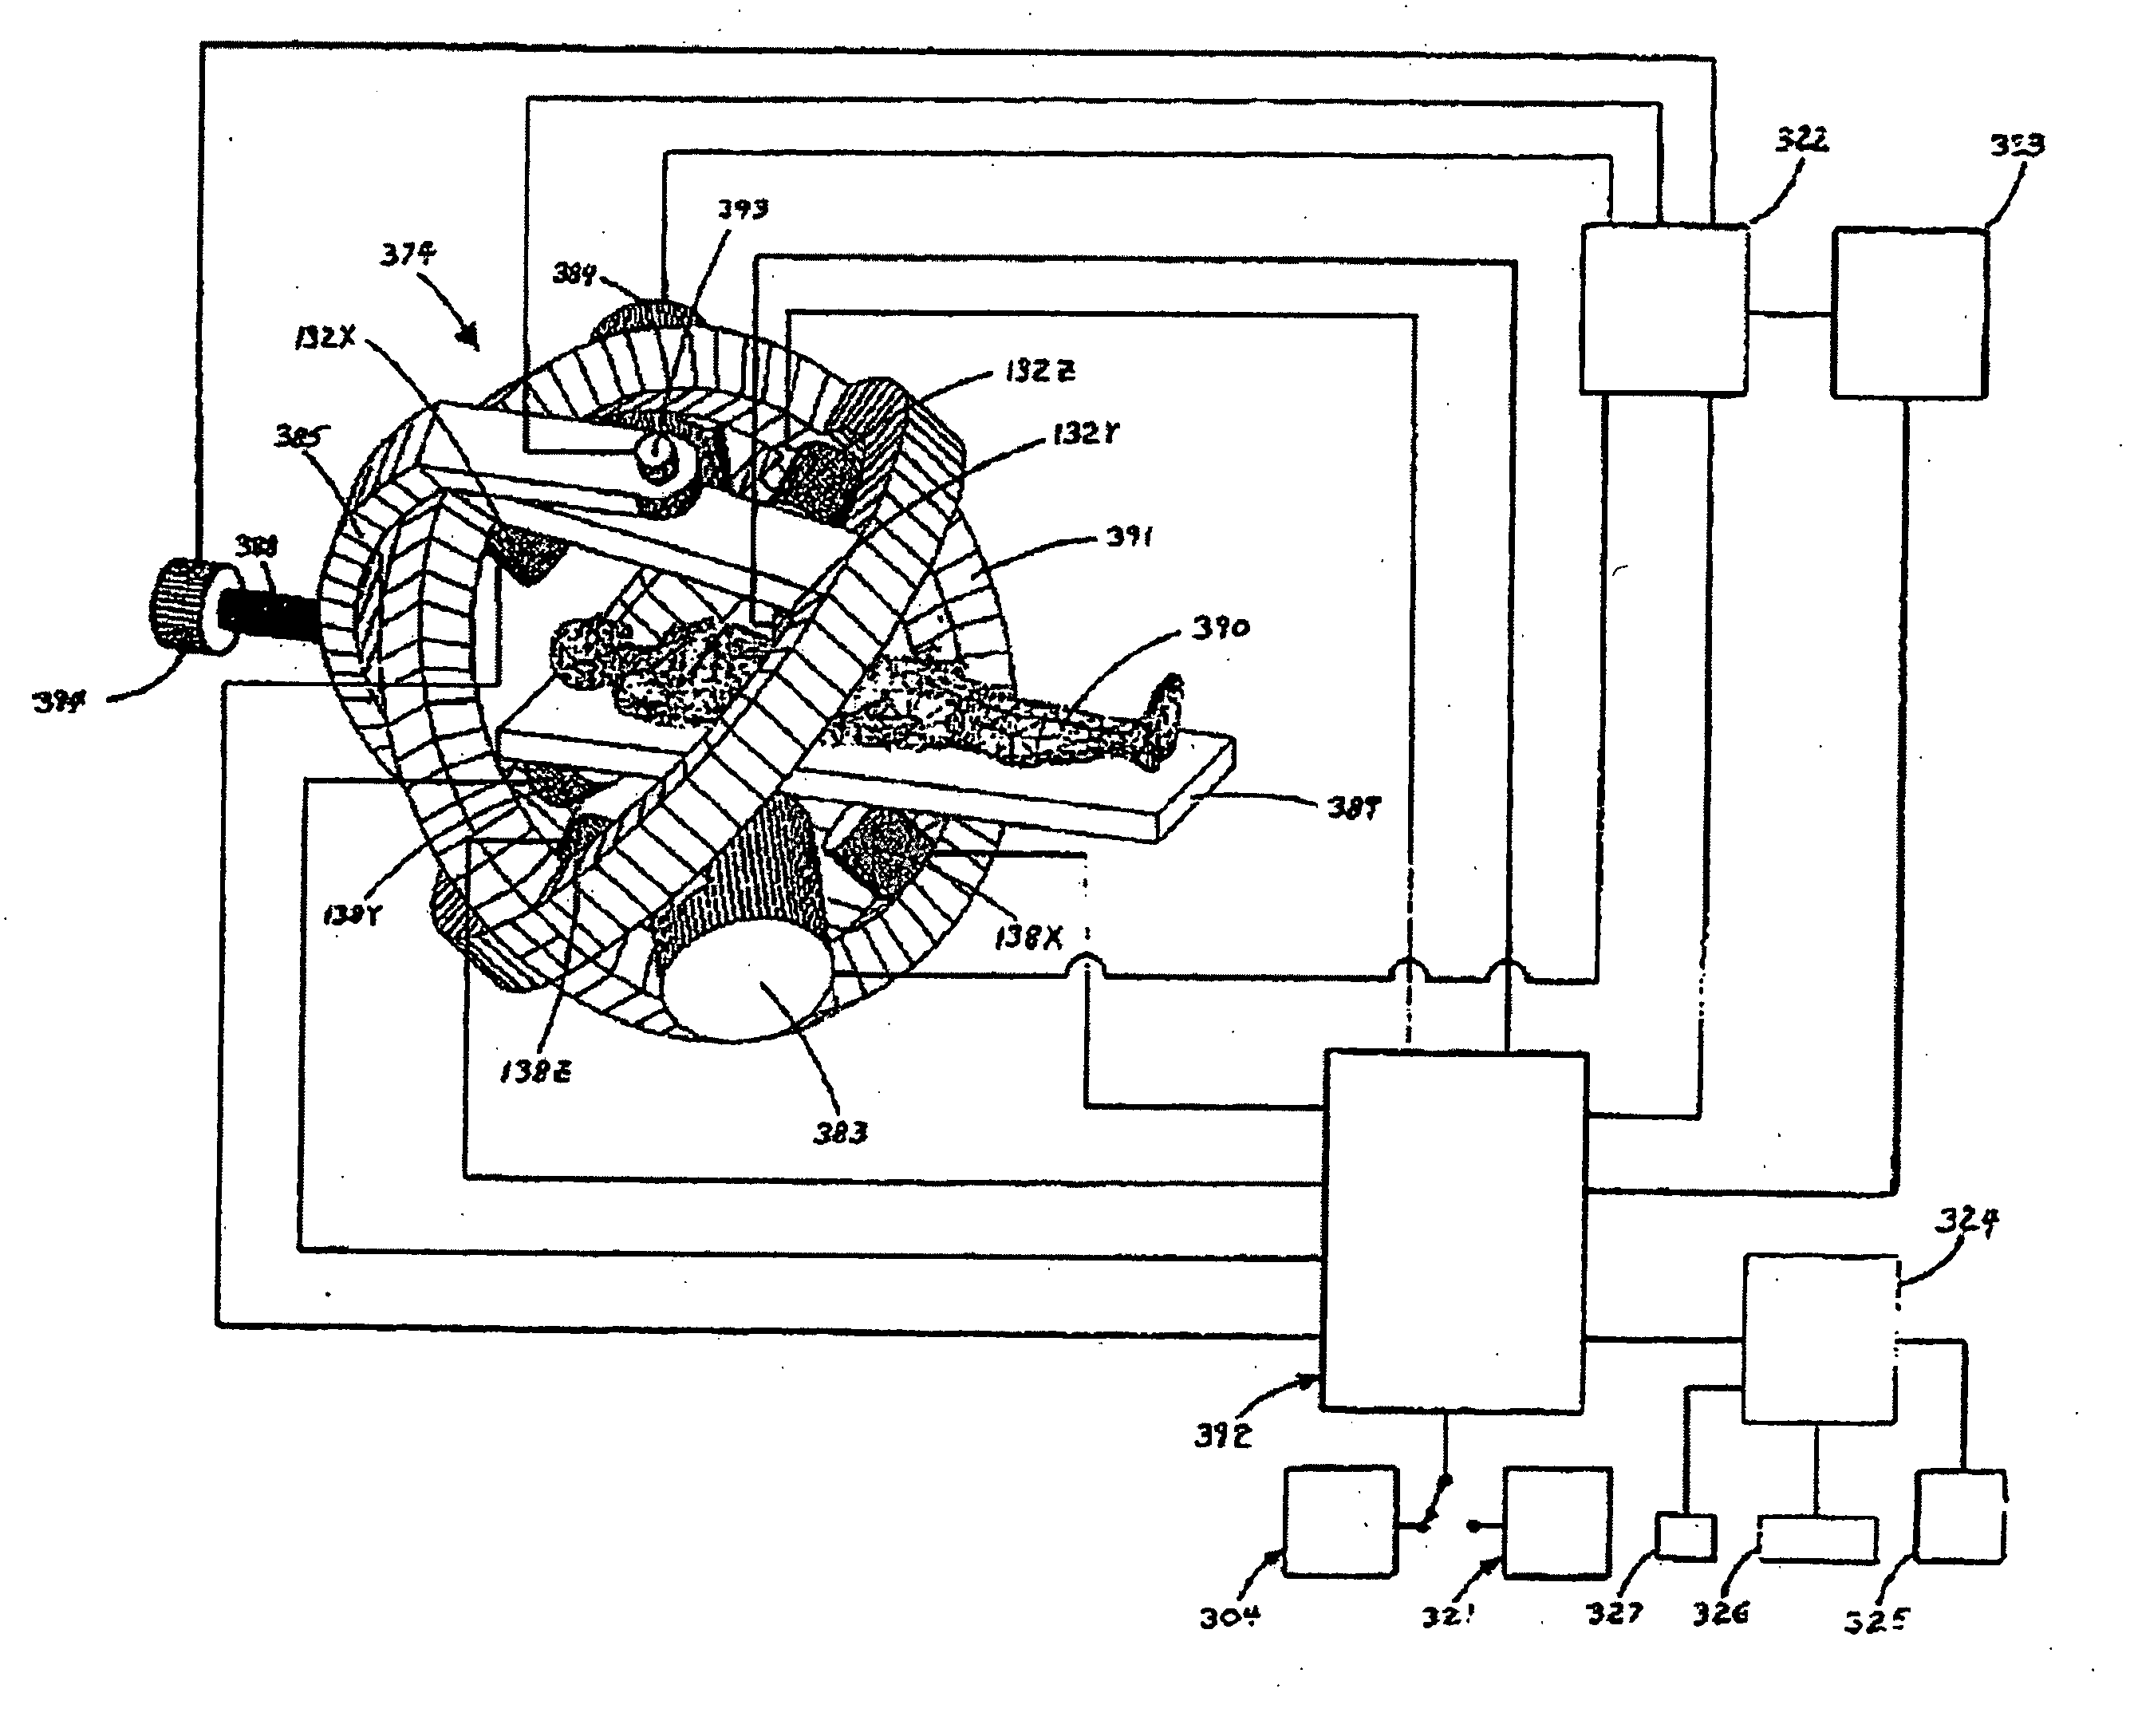 Apparatus and method for generating a magnetic field